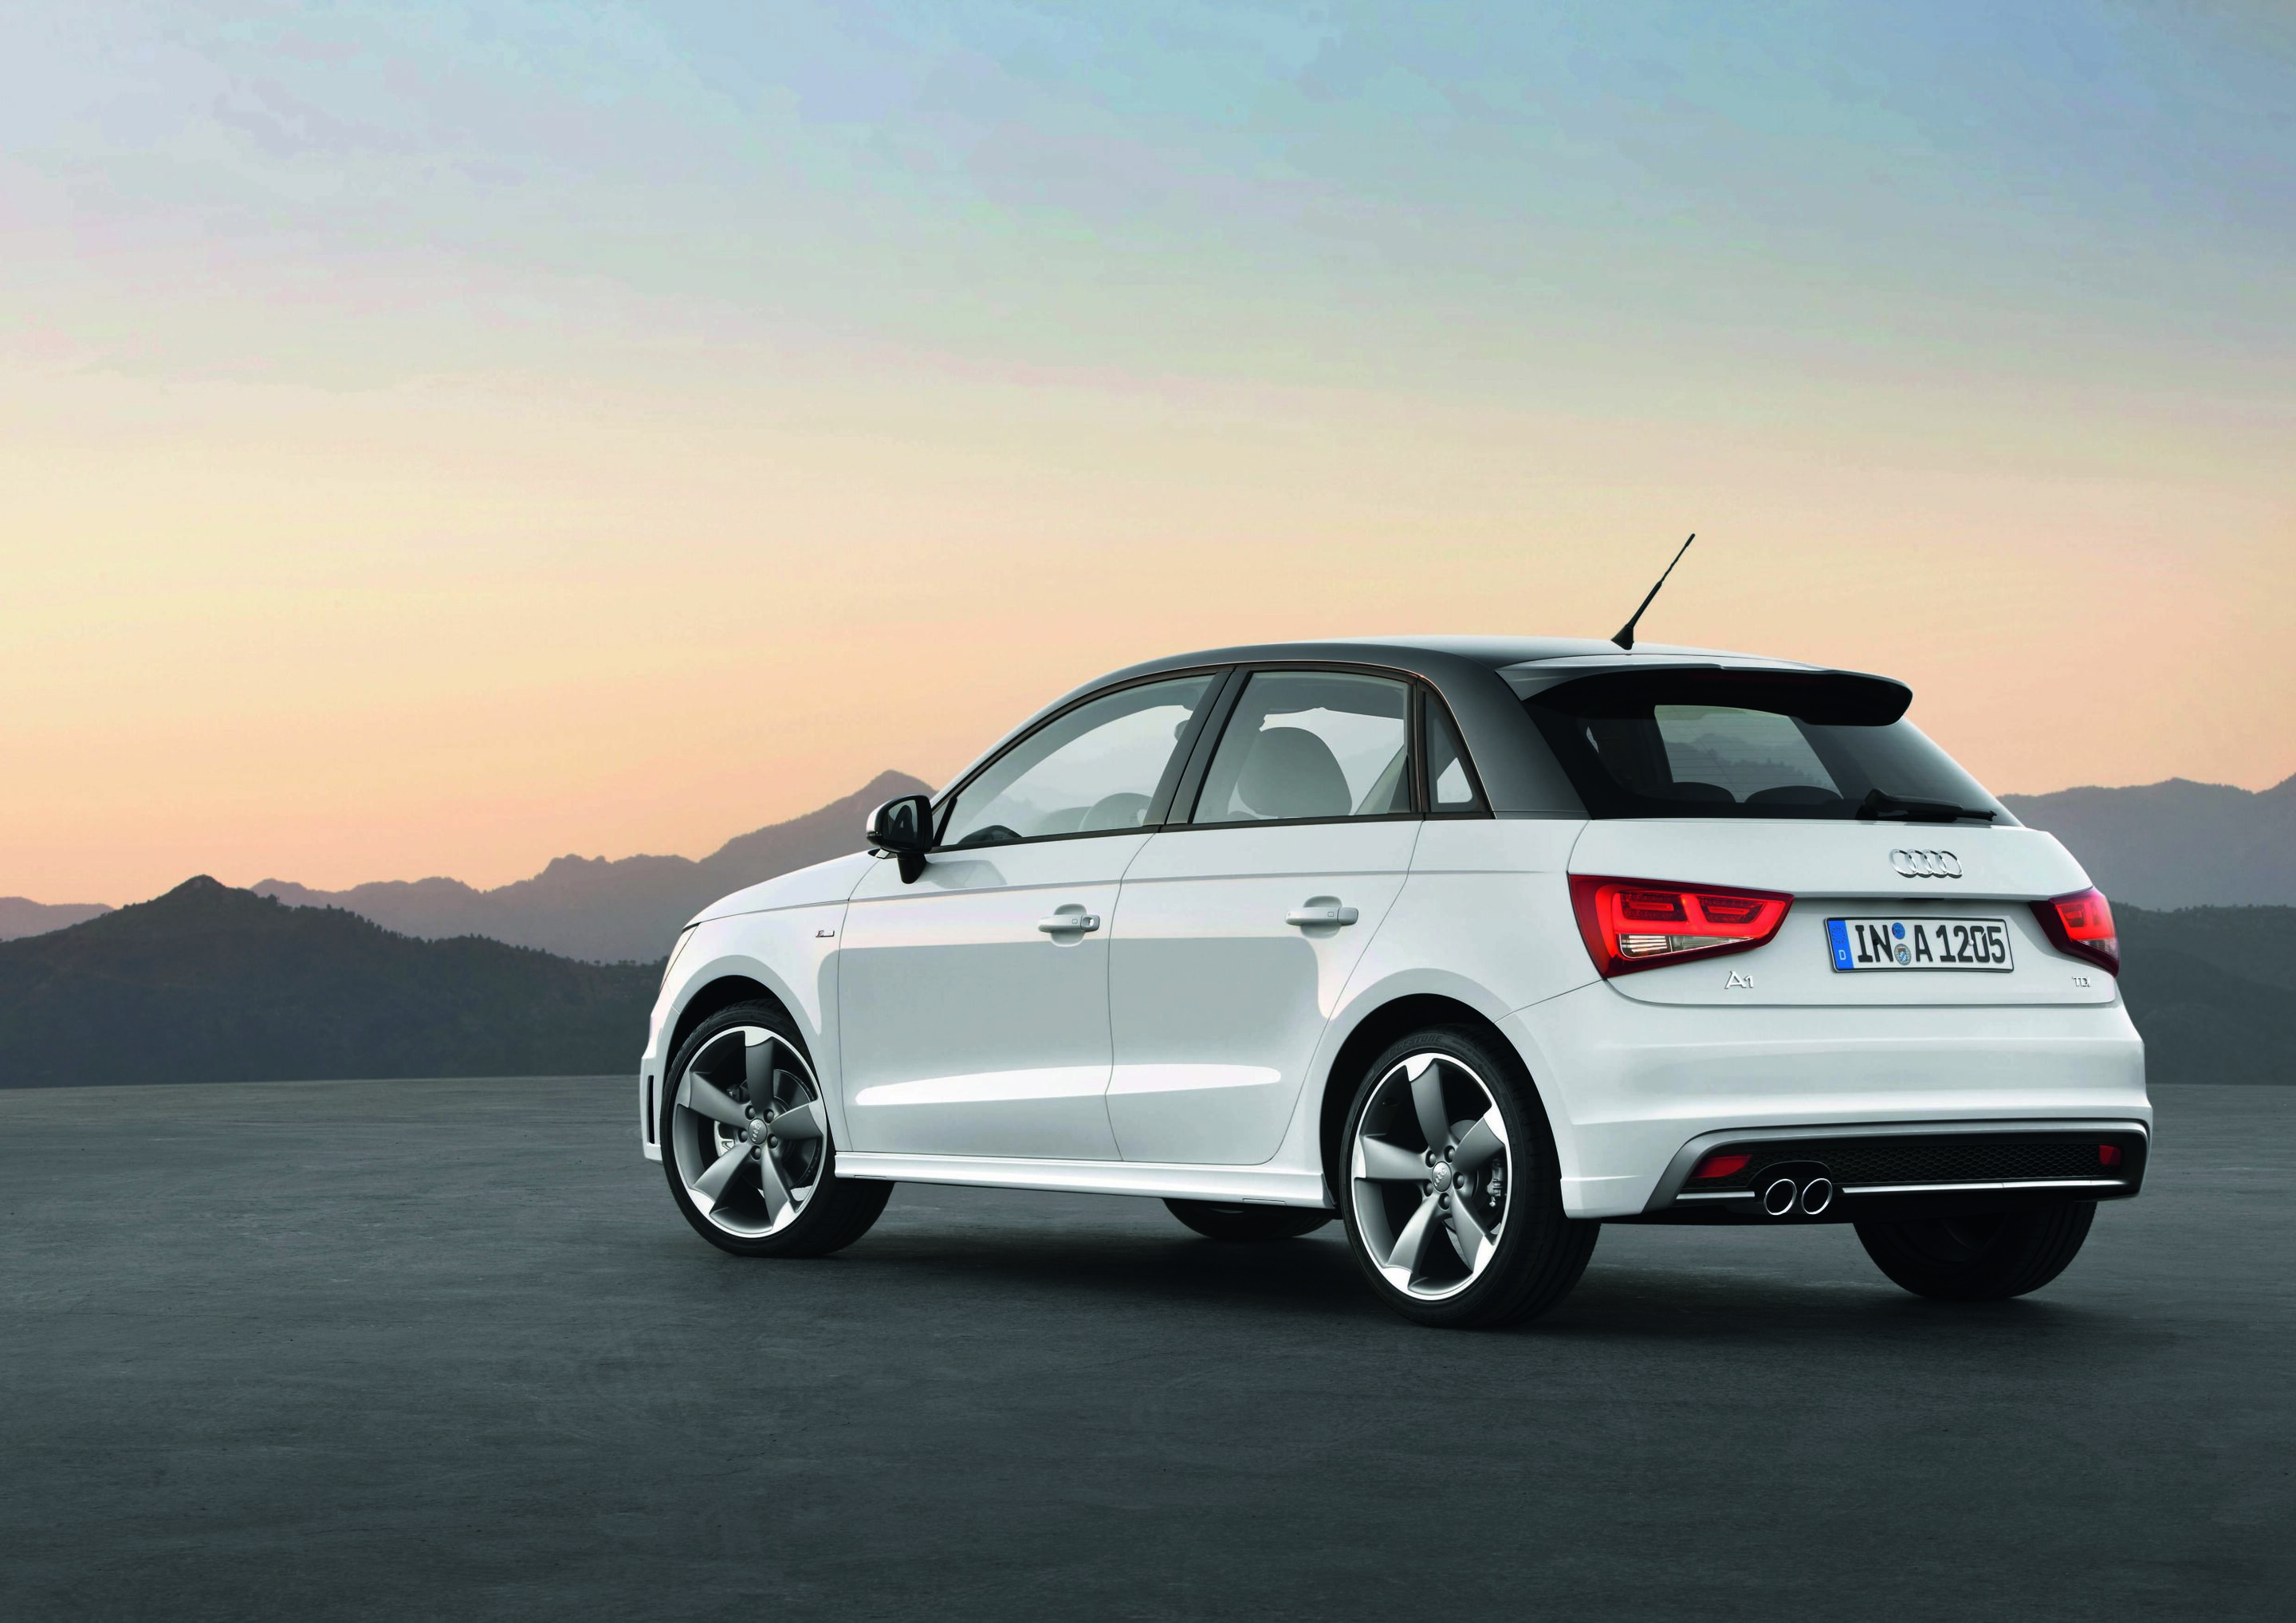 What is Audi S Line?